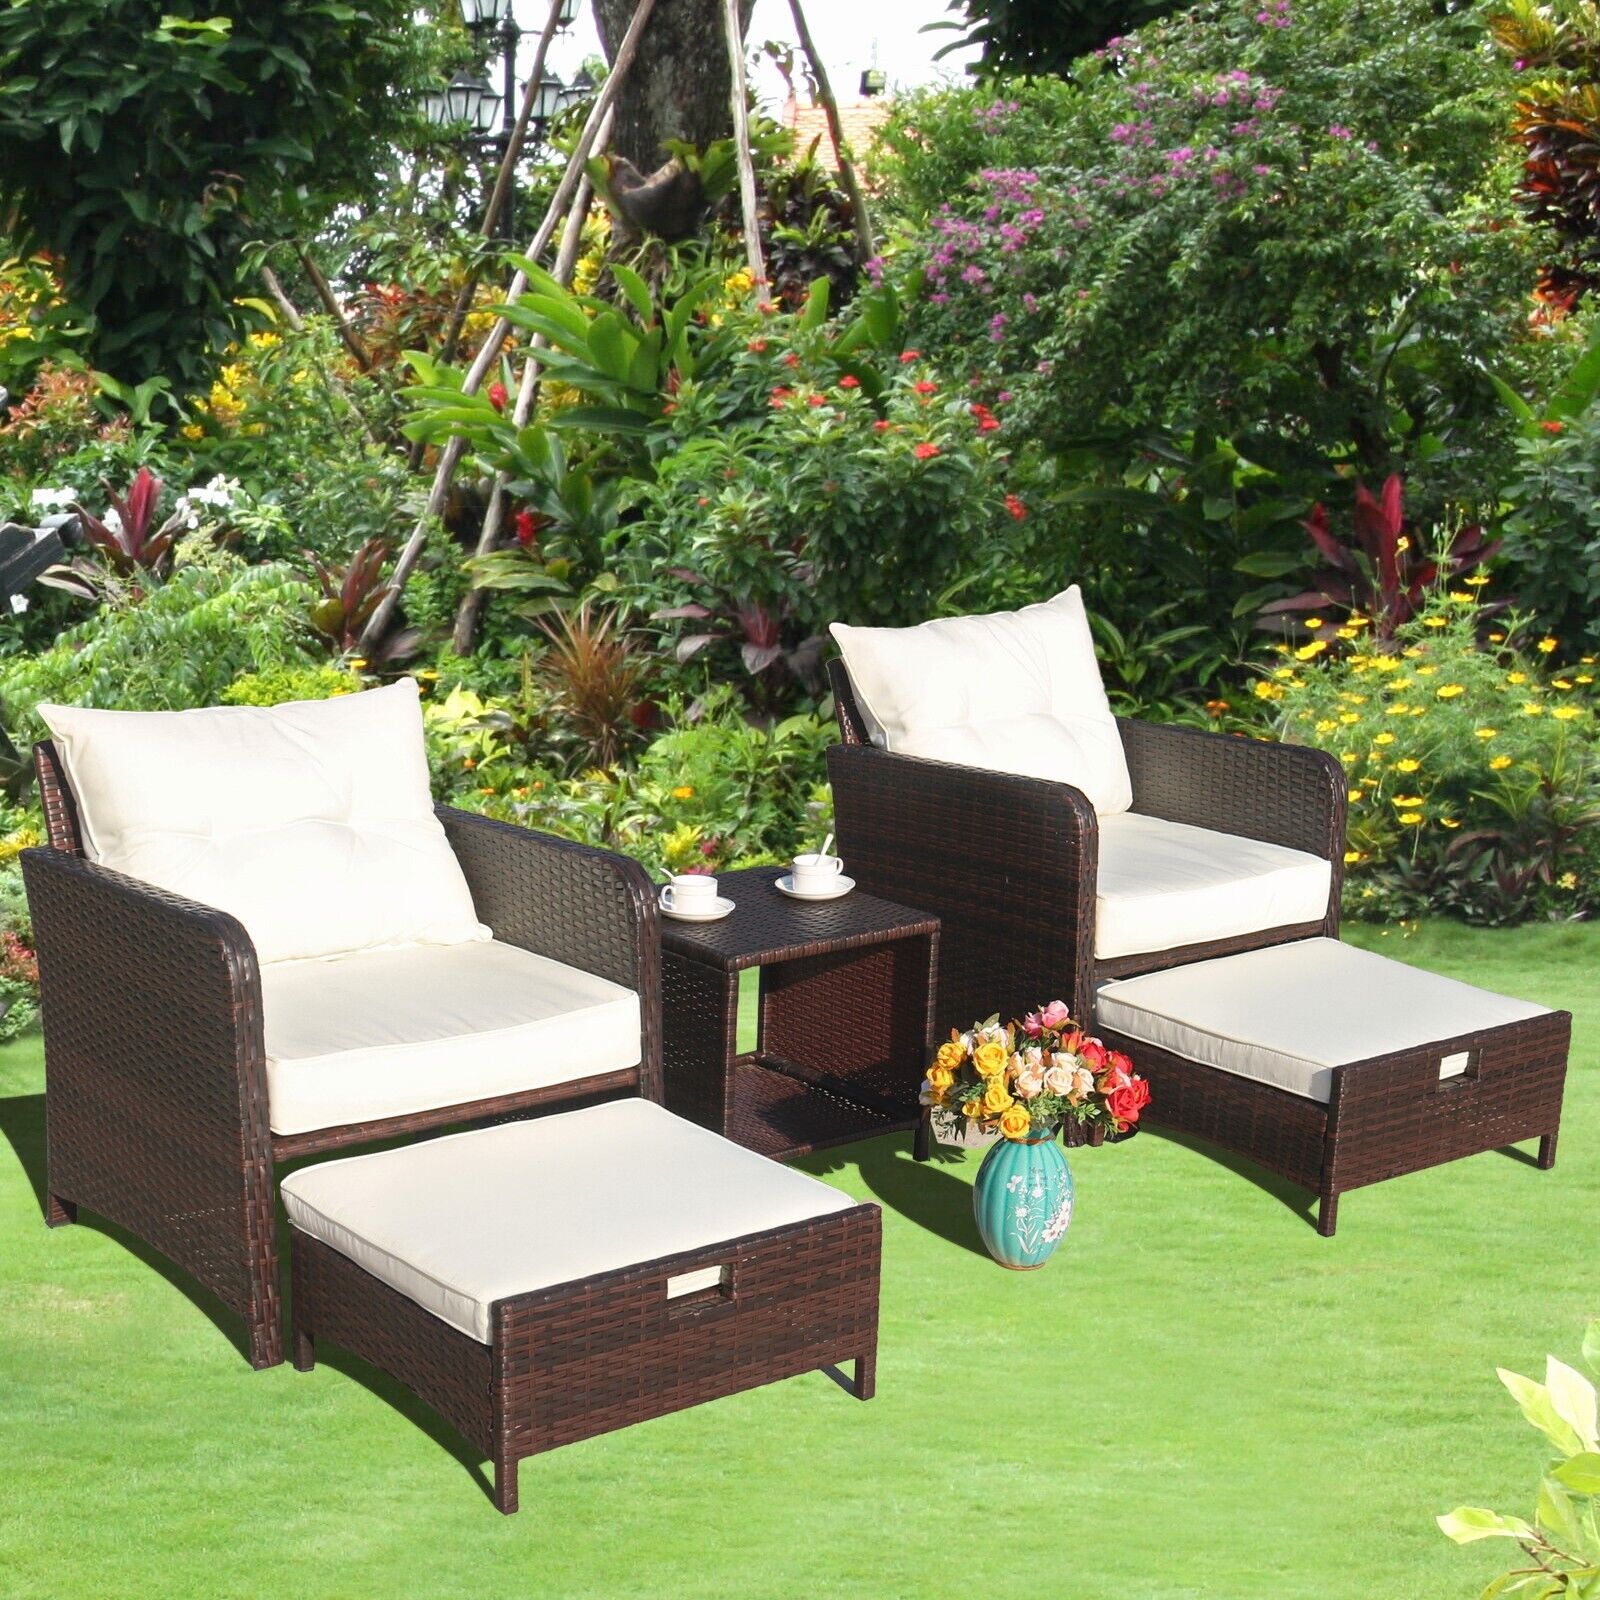 5PCS Patio Furniture Sectional Sofa Set Outdoor Rattan Wicker Couch W/Foot Stool